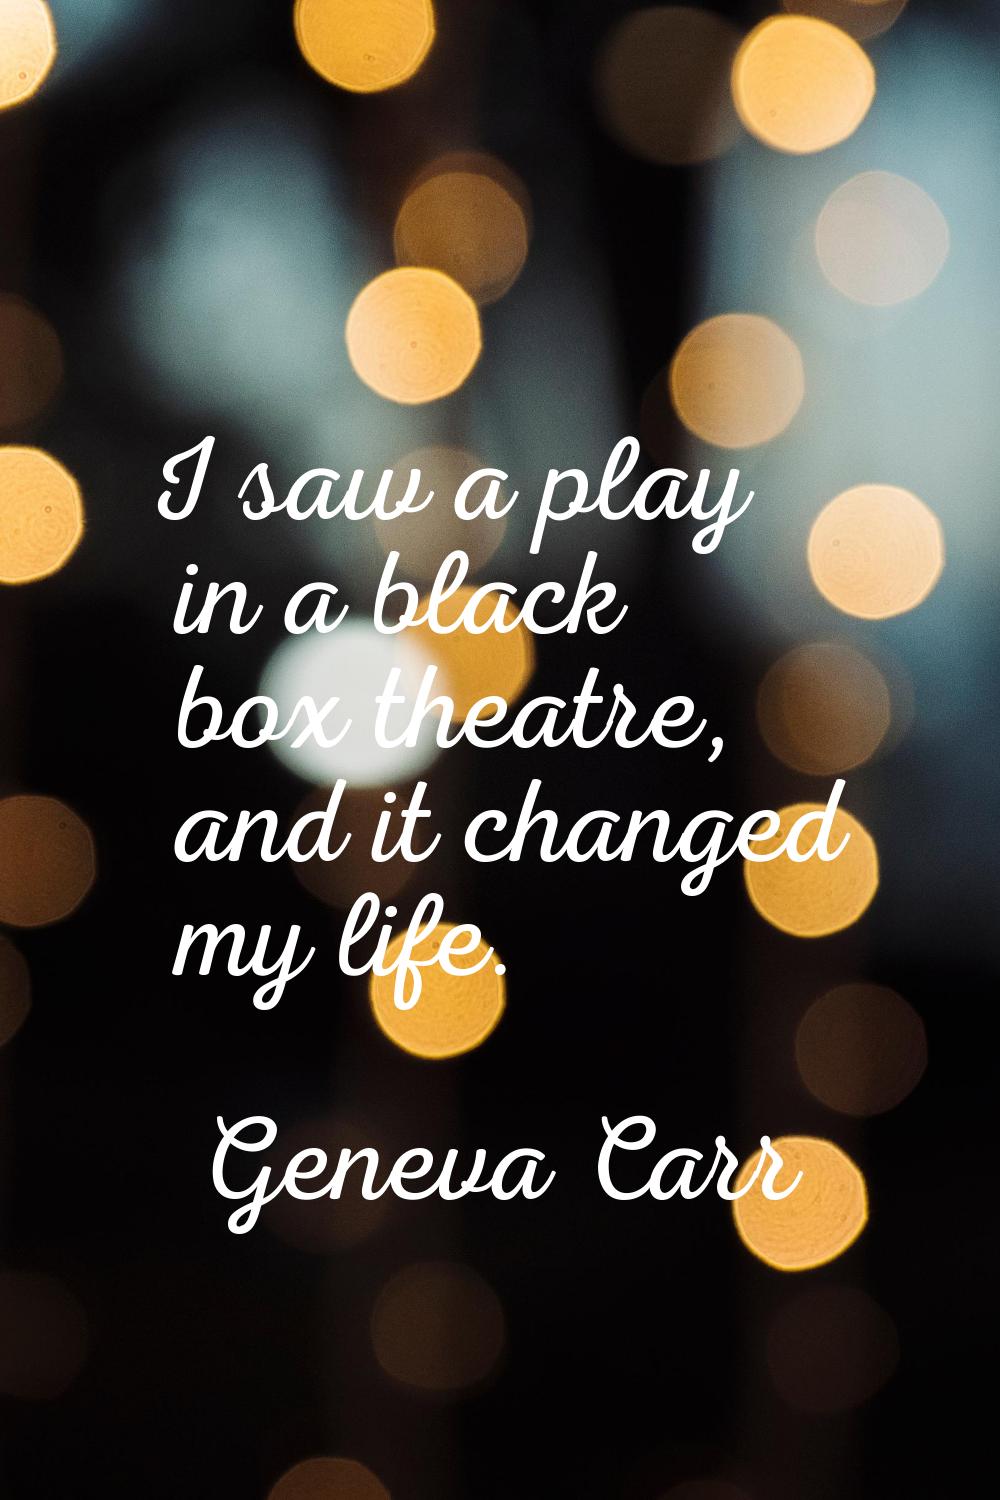 I saw a play in a black box theatre, and it changed my life.